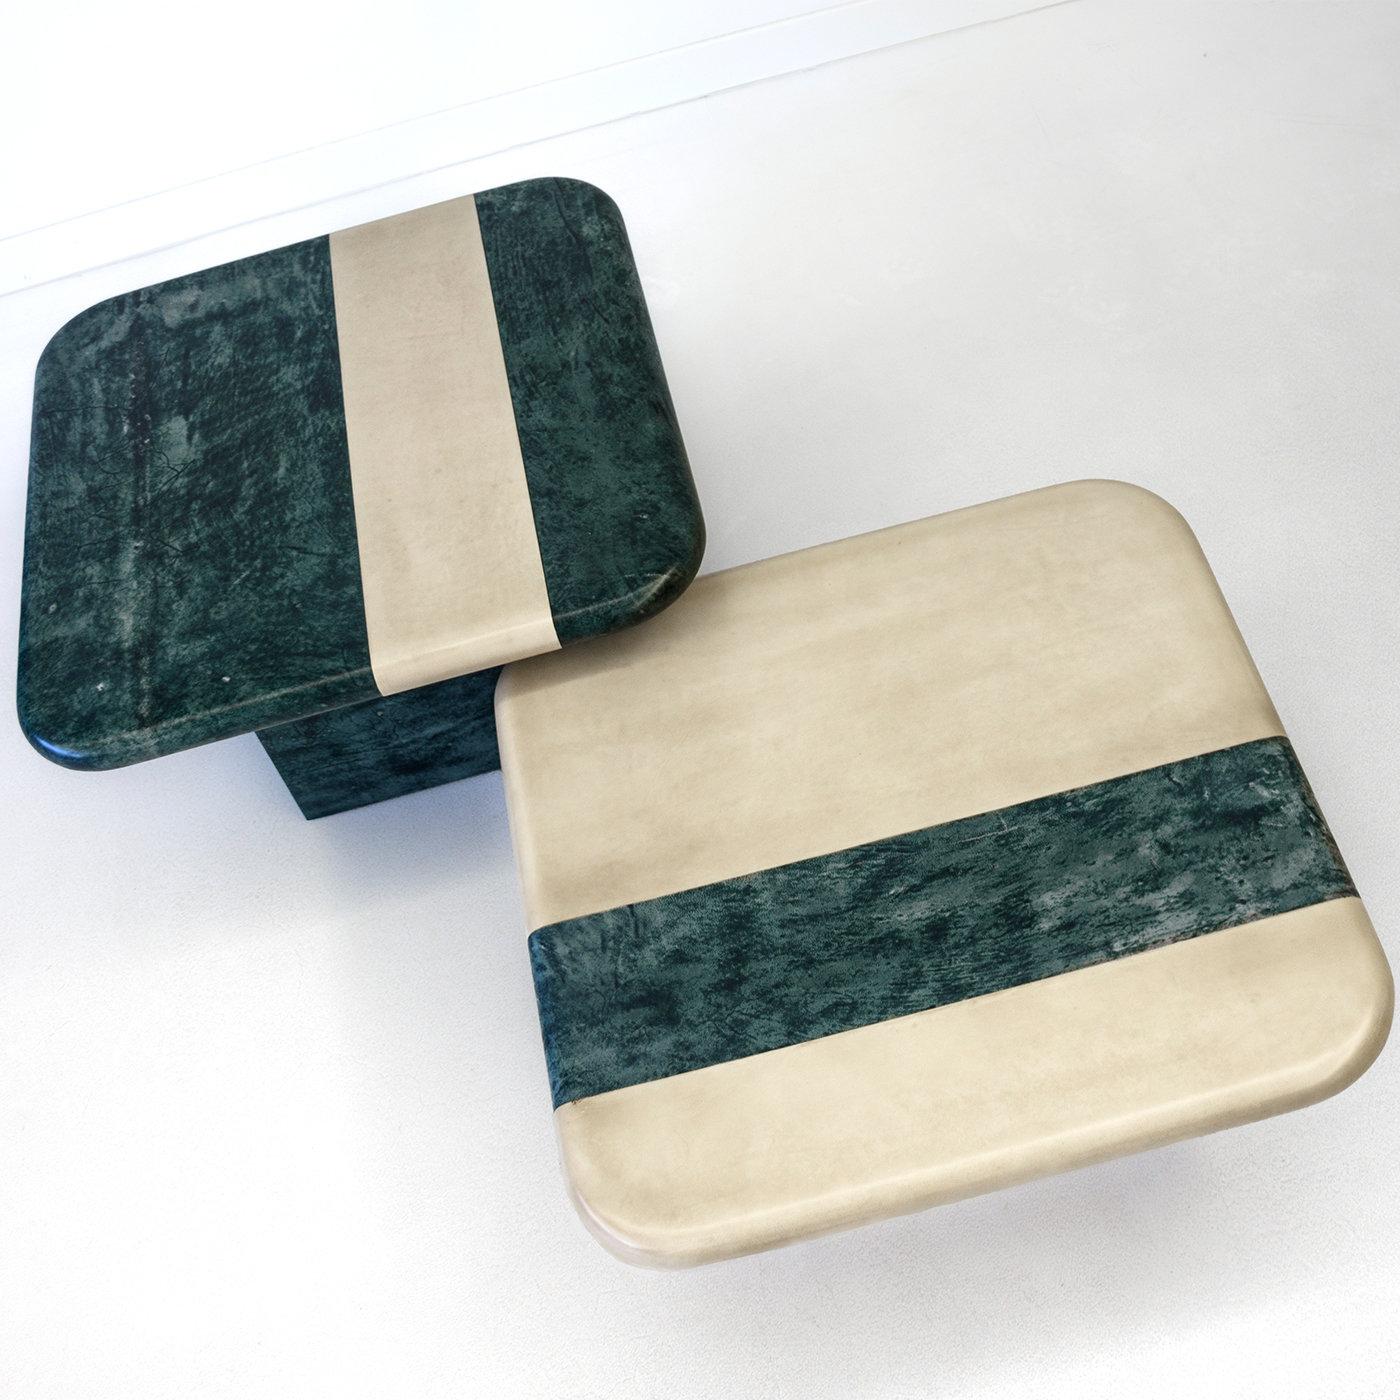 Crafted with meticulous attention to quality and detail, this set of coffee tables is defined by a square top decorated with the same geometric pattern in reverse colors: blue-green with sand stripe for the tall one (80 X 80 X H46cm) and sand with